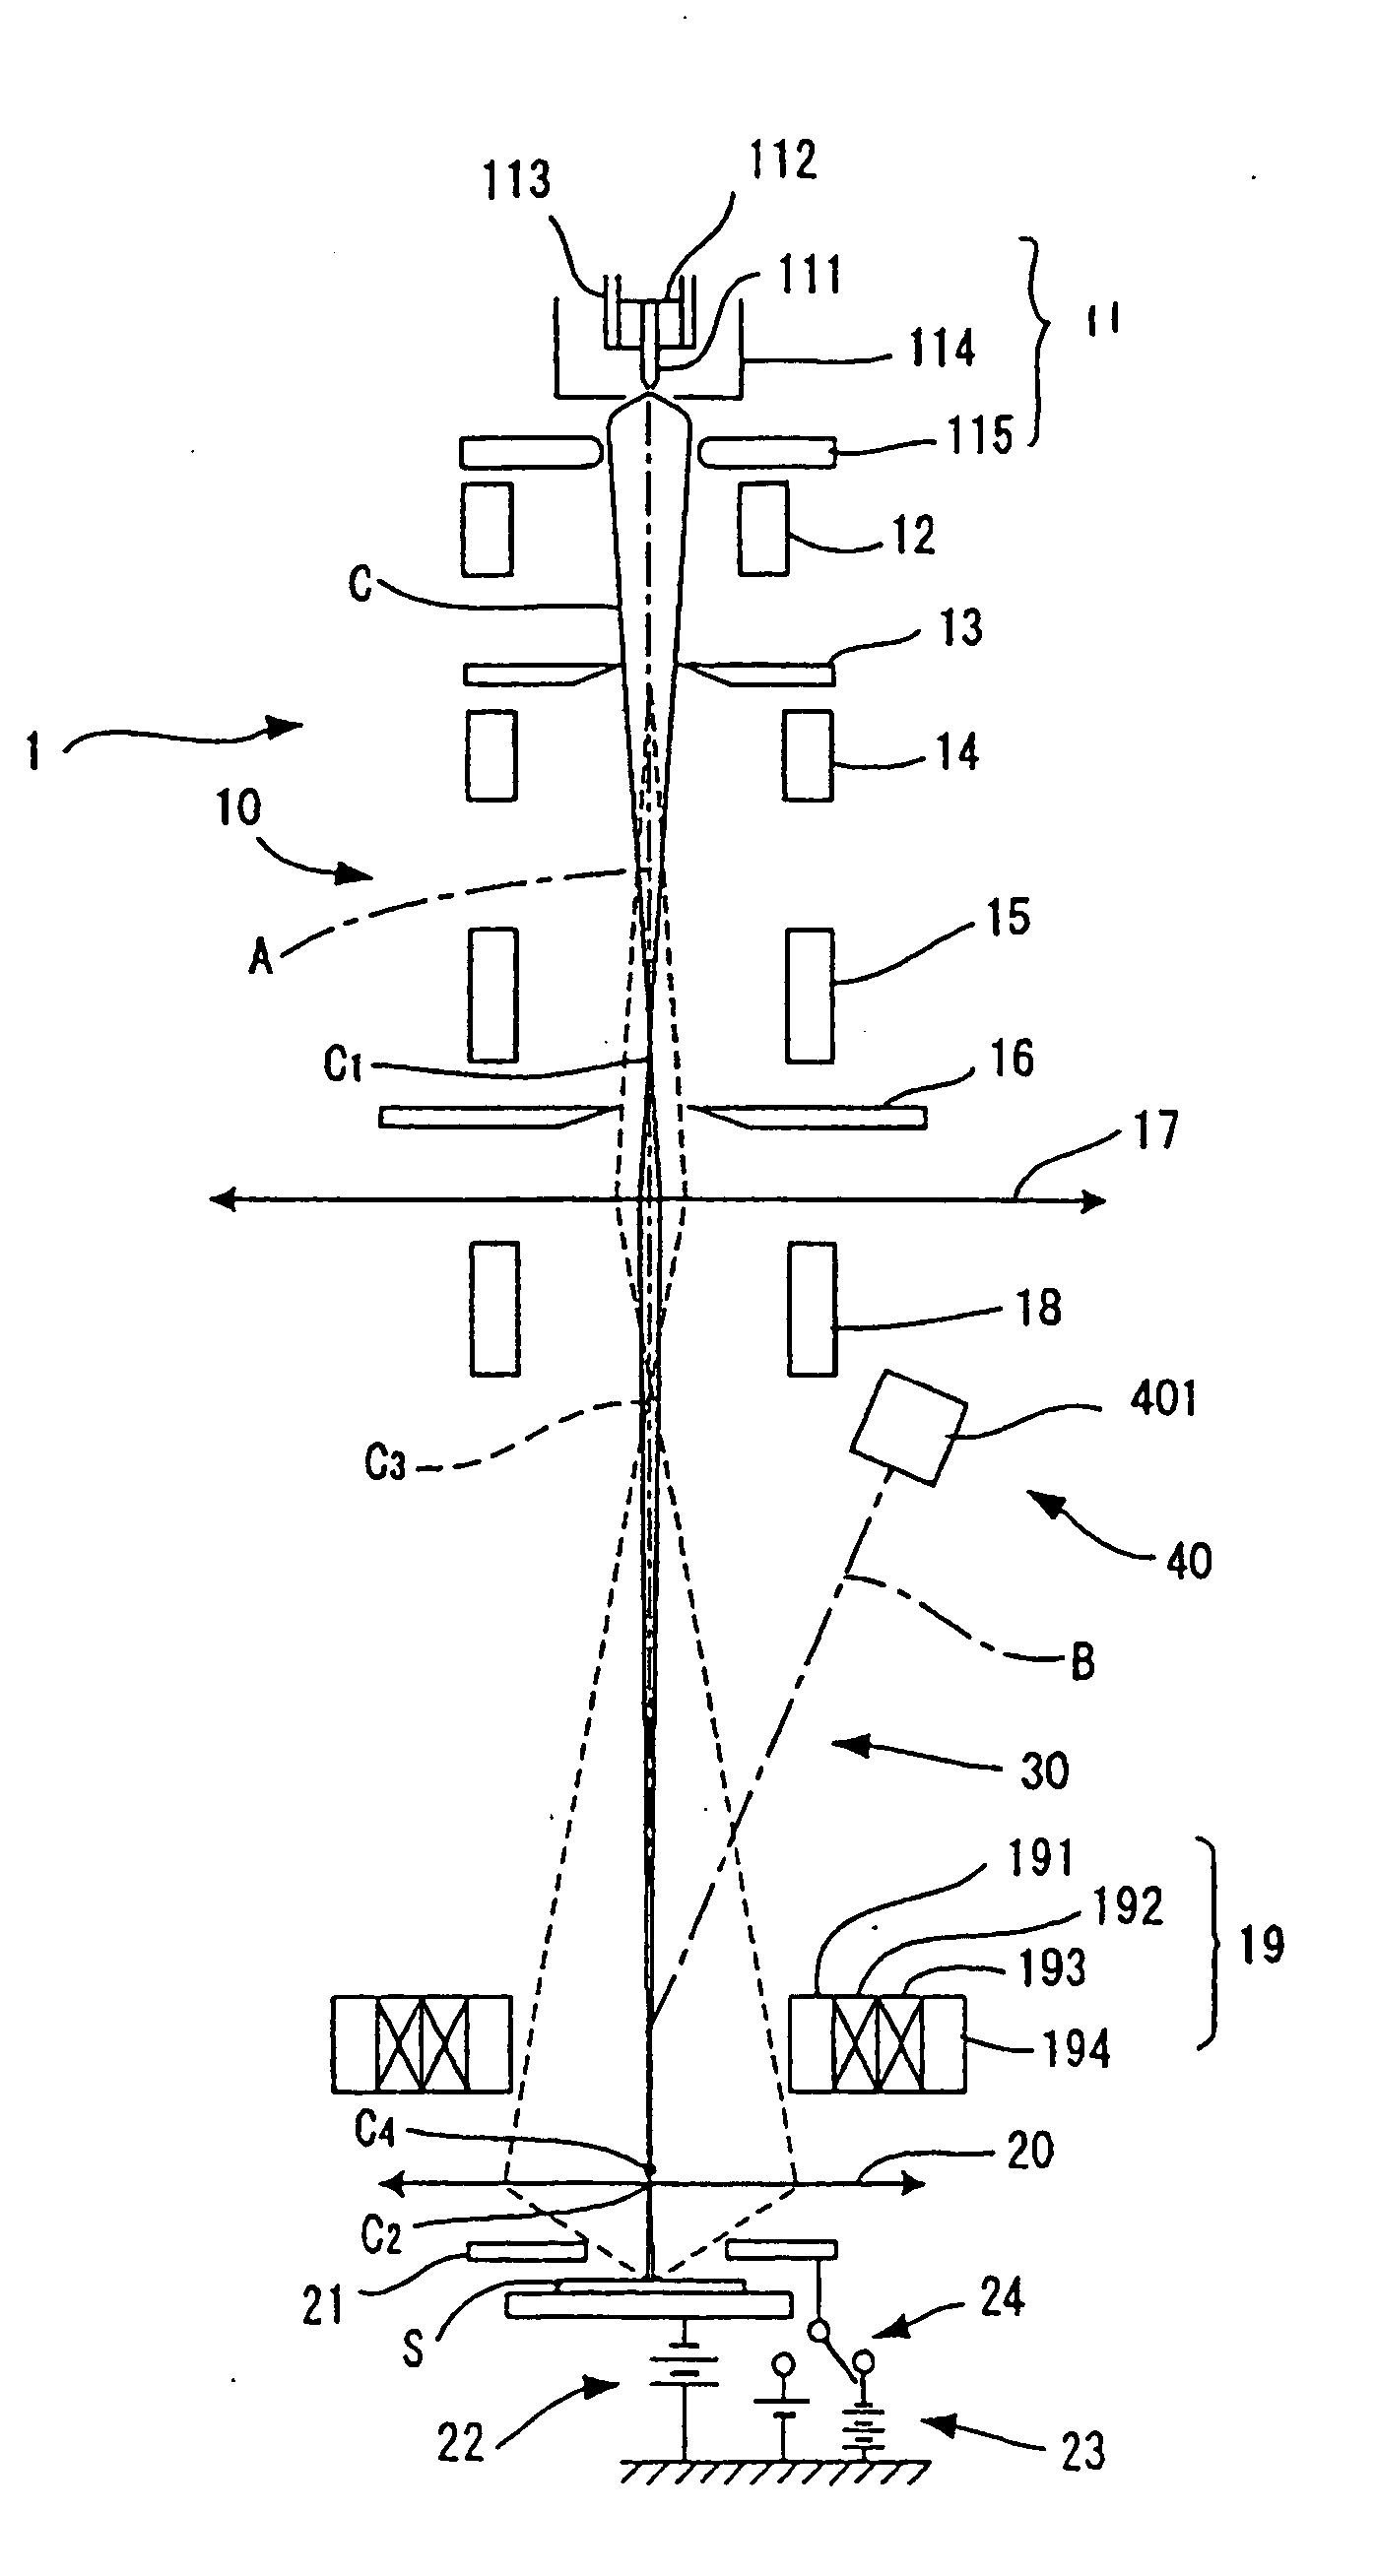 Electron beam system and method of manufacturing devices using the system